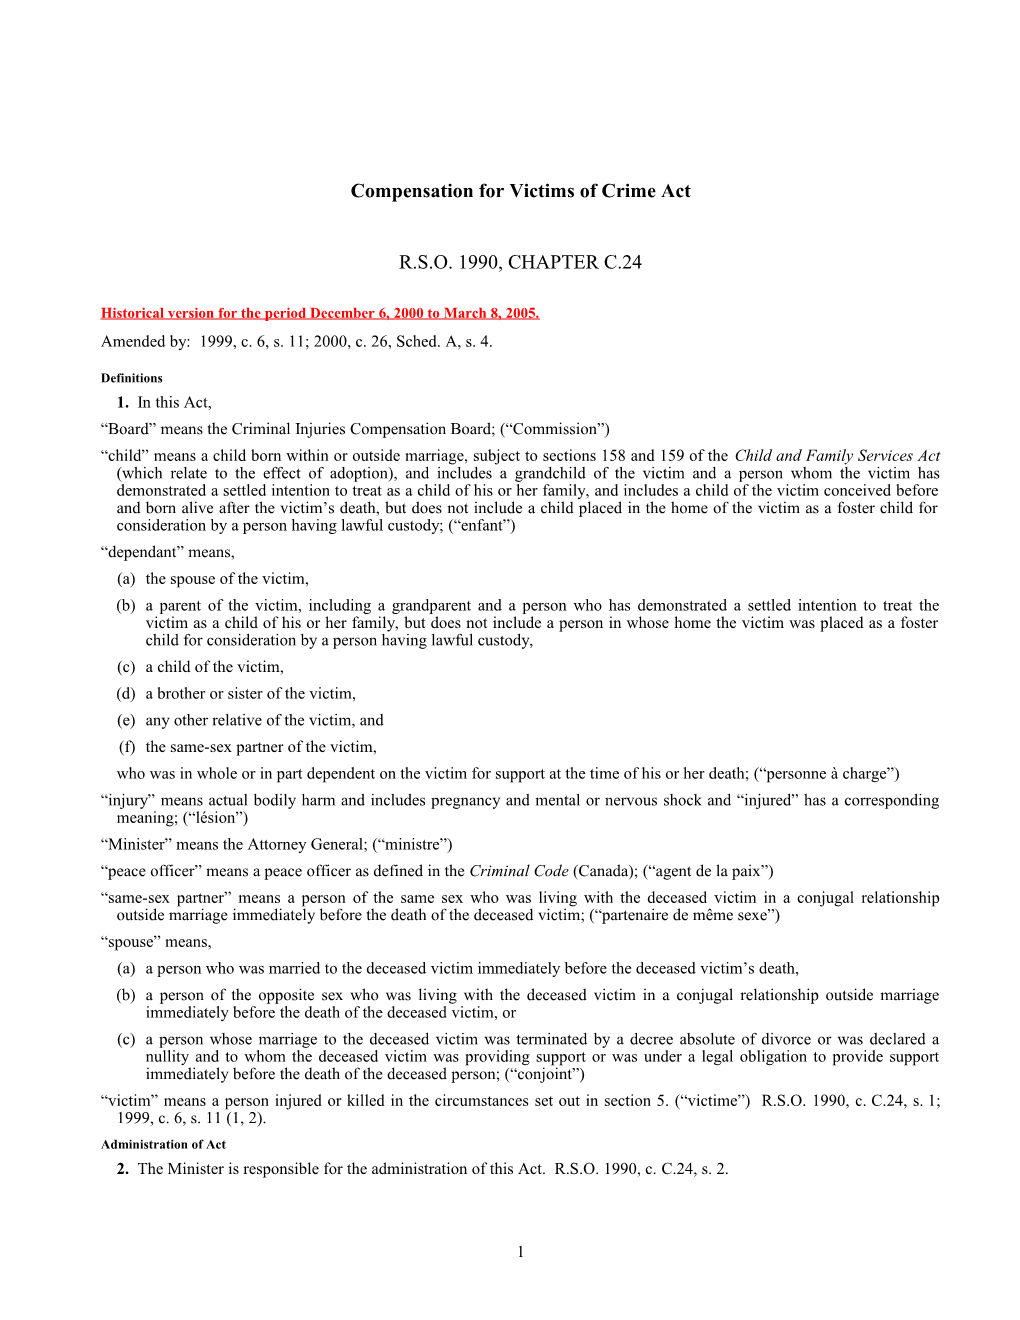 Compensation for Victims of Crime Act, R.S.O. 1990, C. C.24